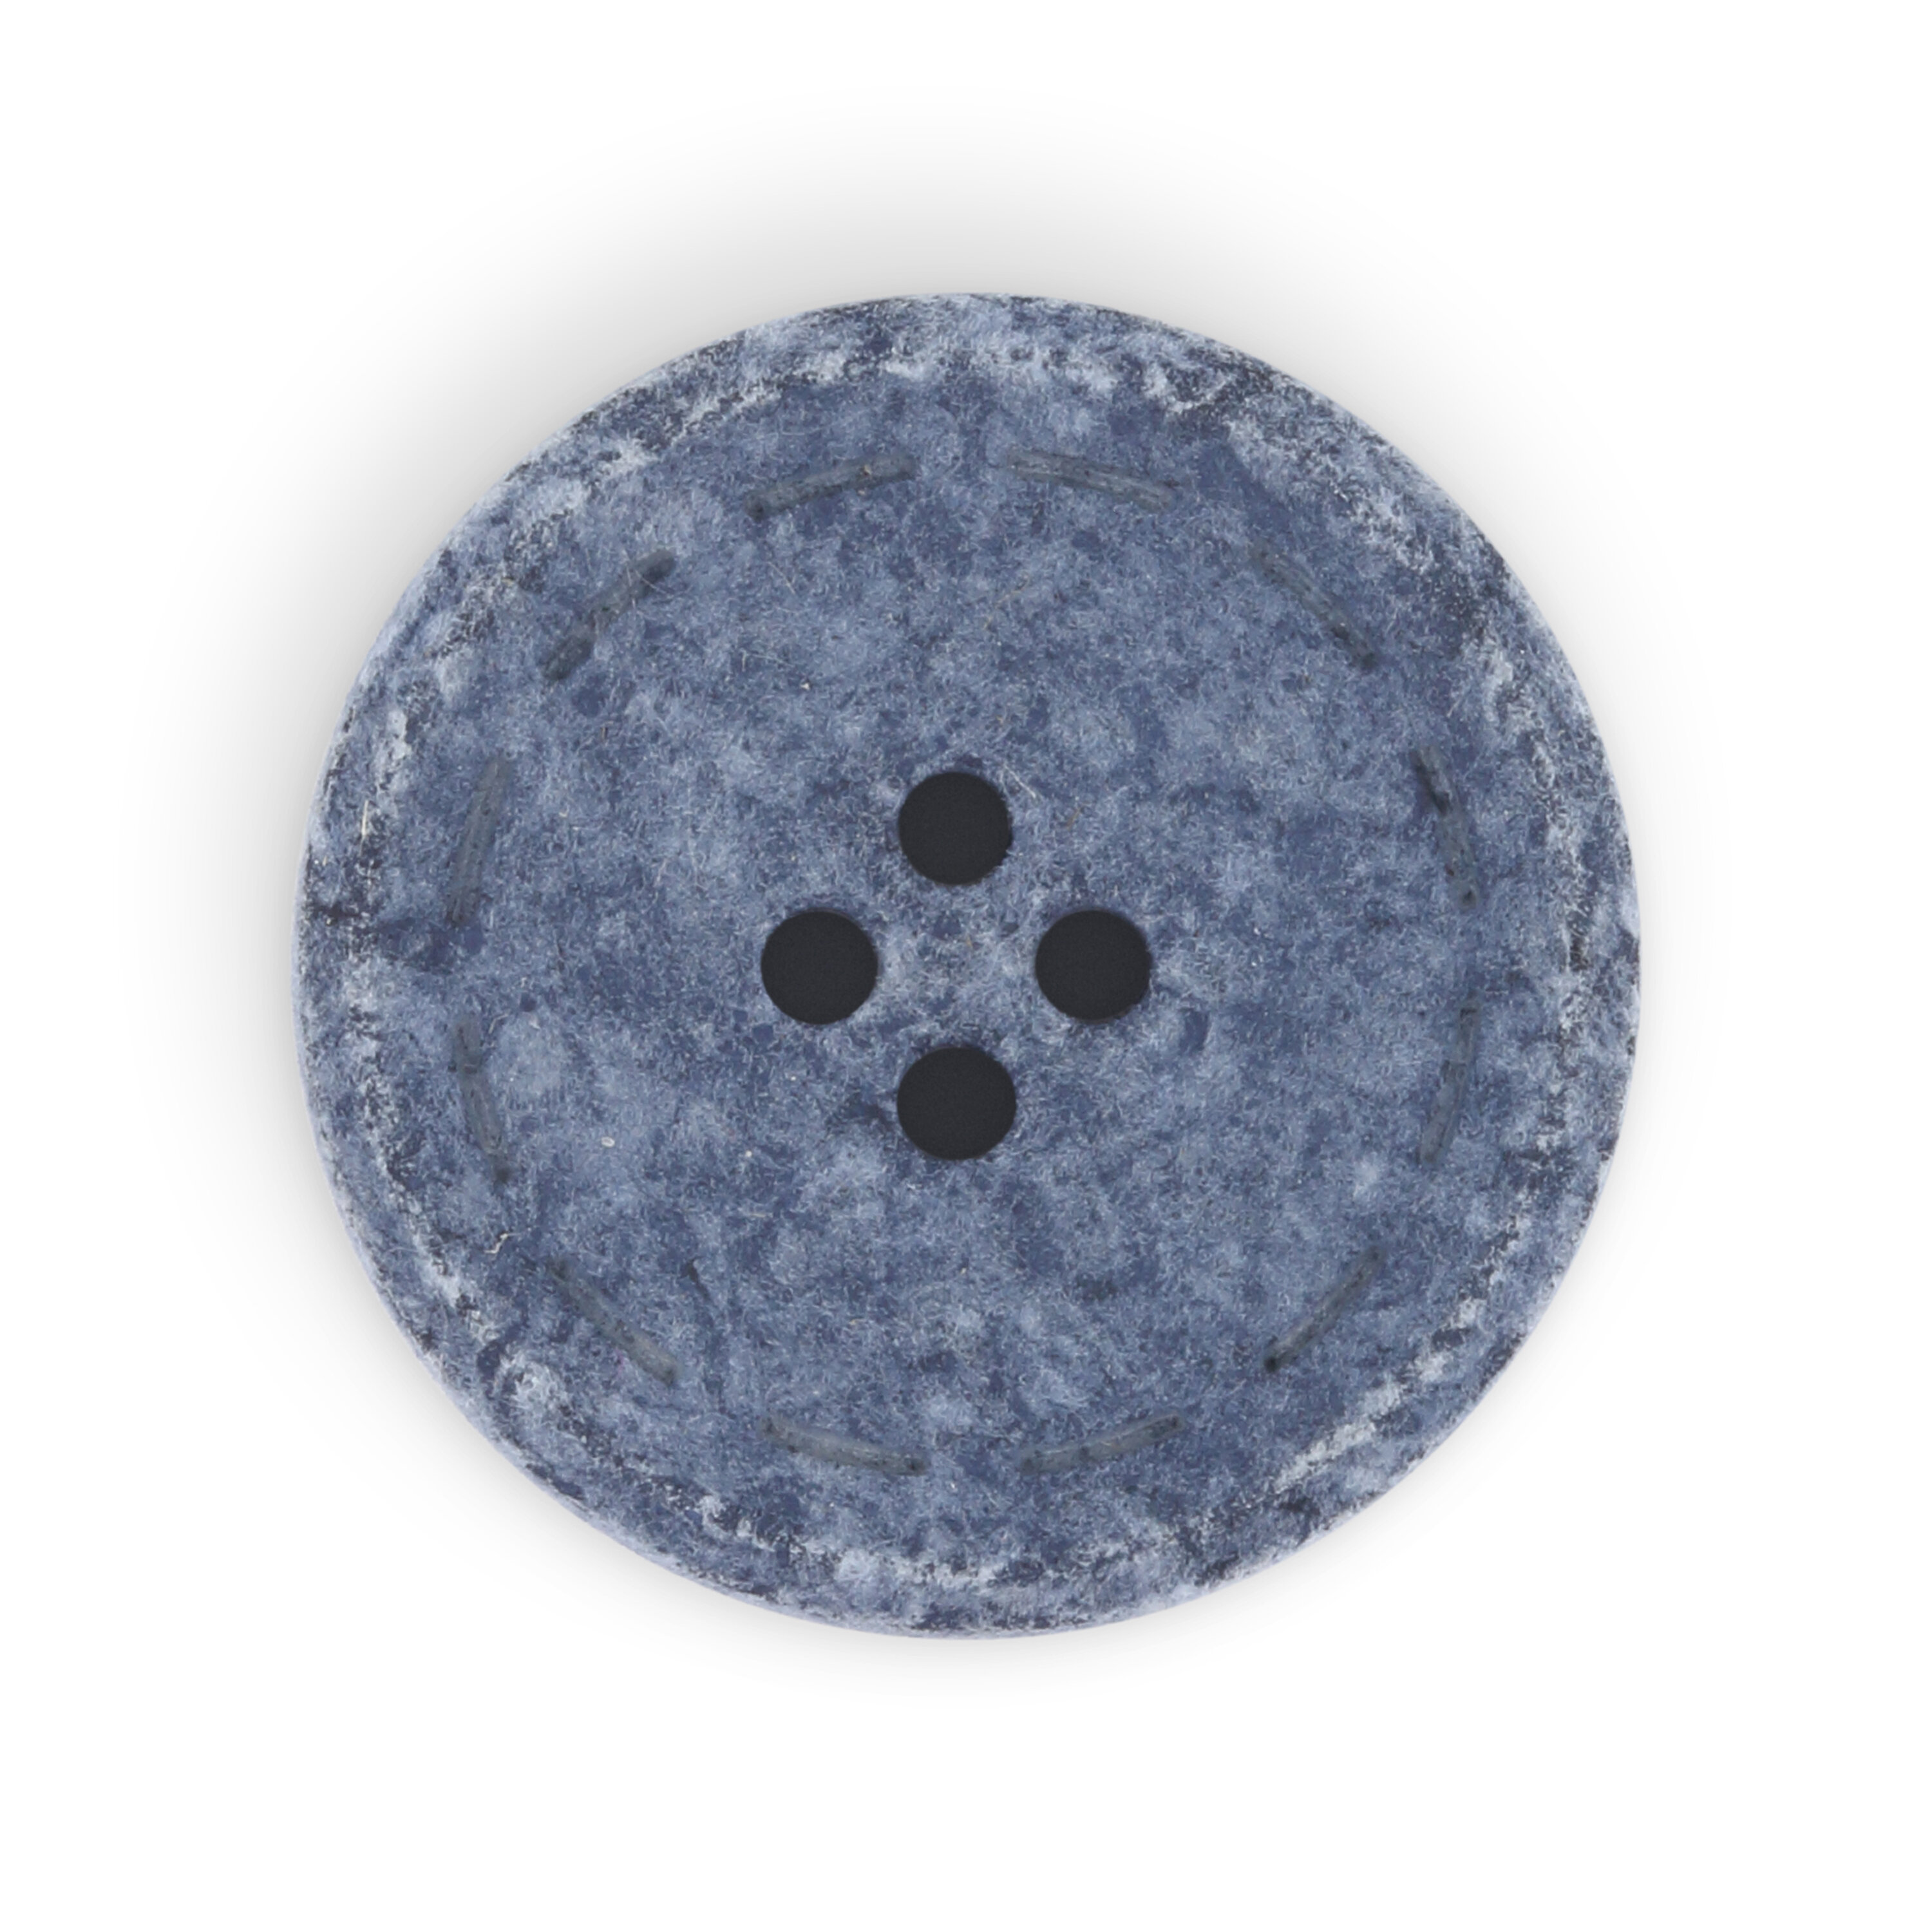 Dritz Recycled Cotton Round Stitch Button, 25mm, Blue, 6 Buttons